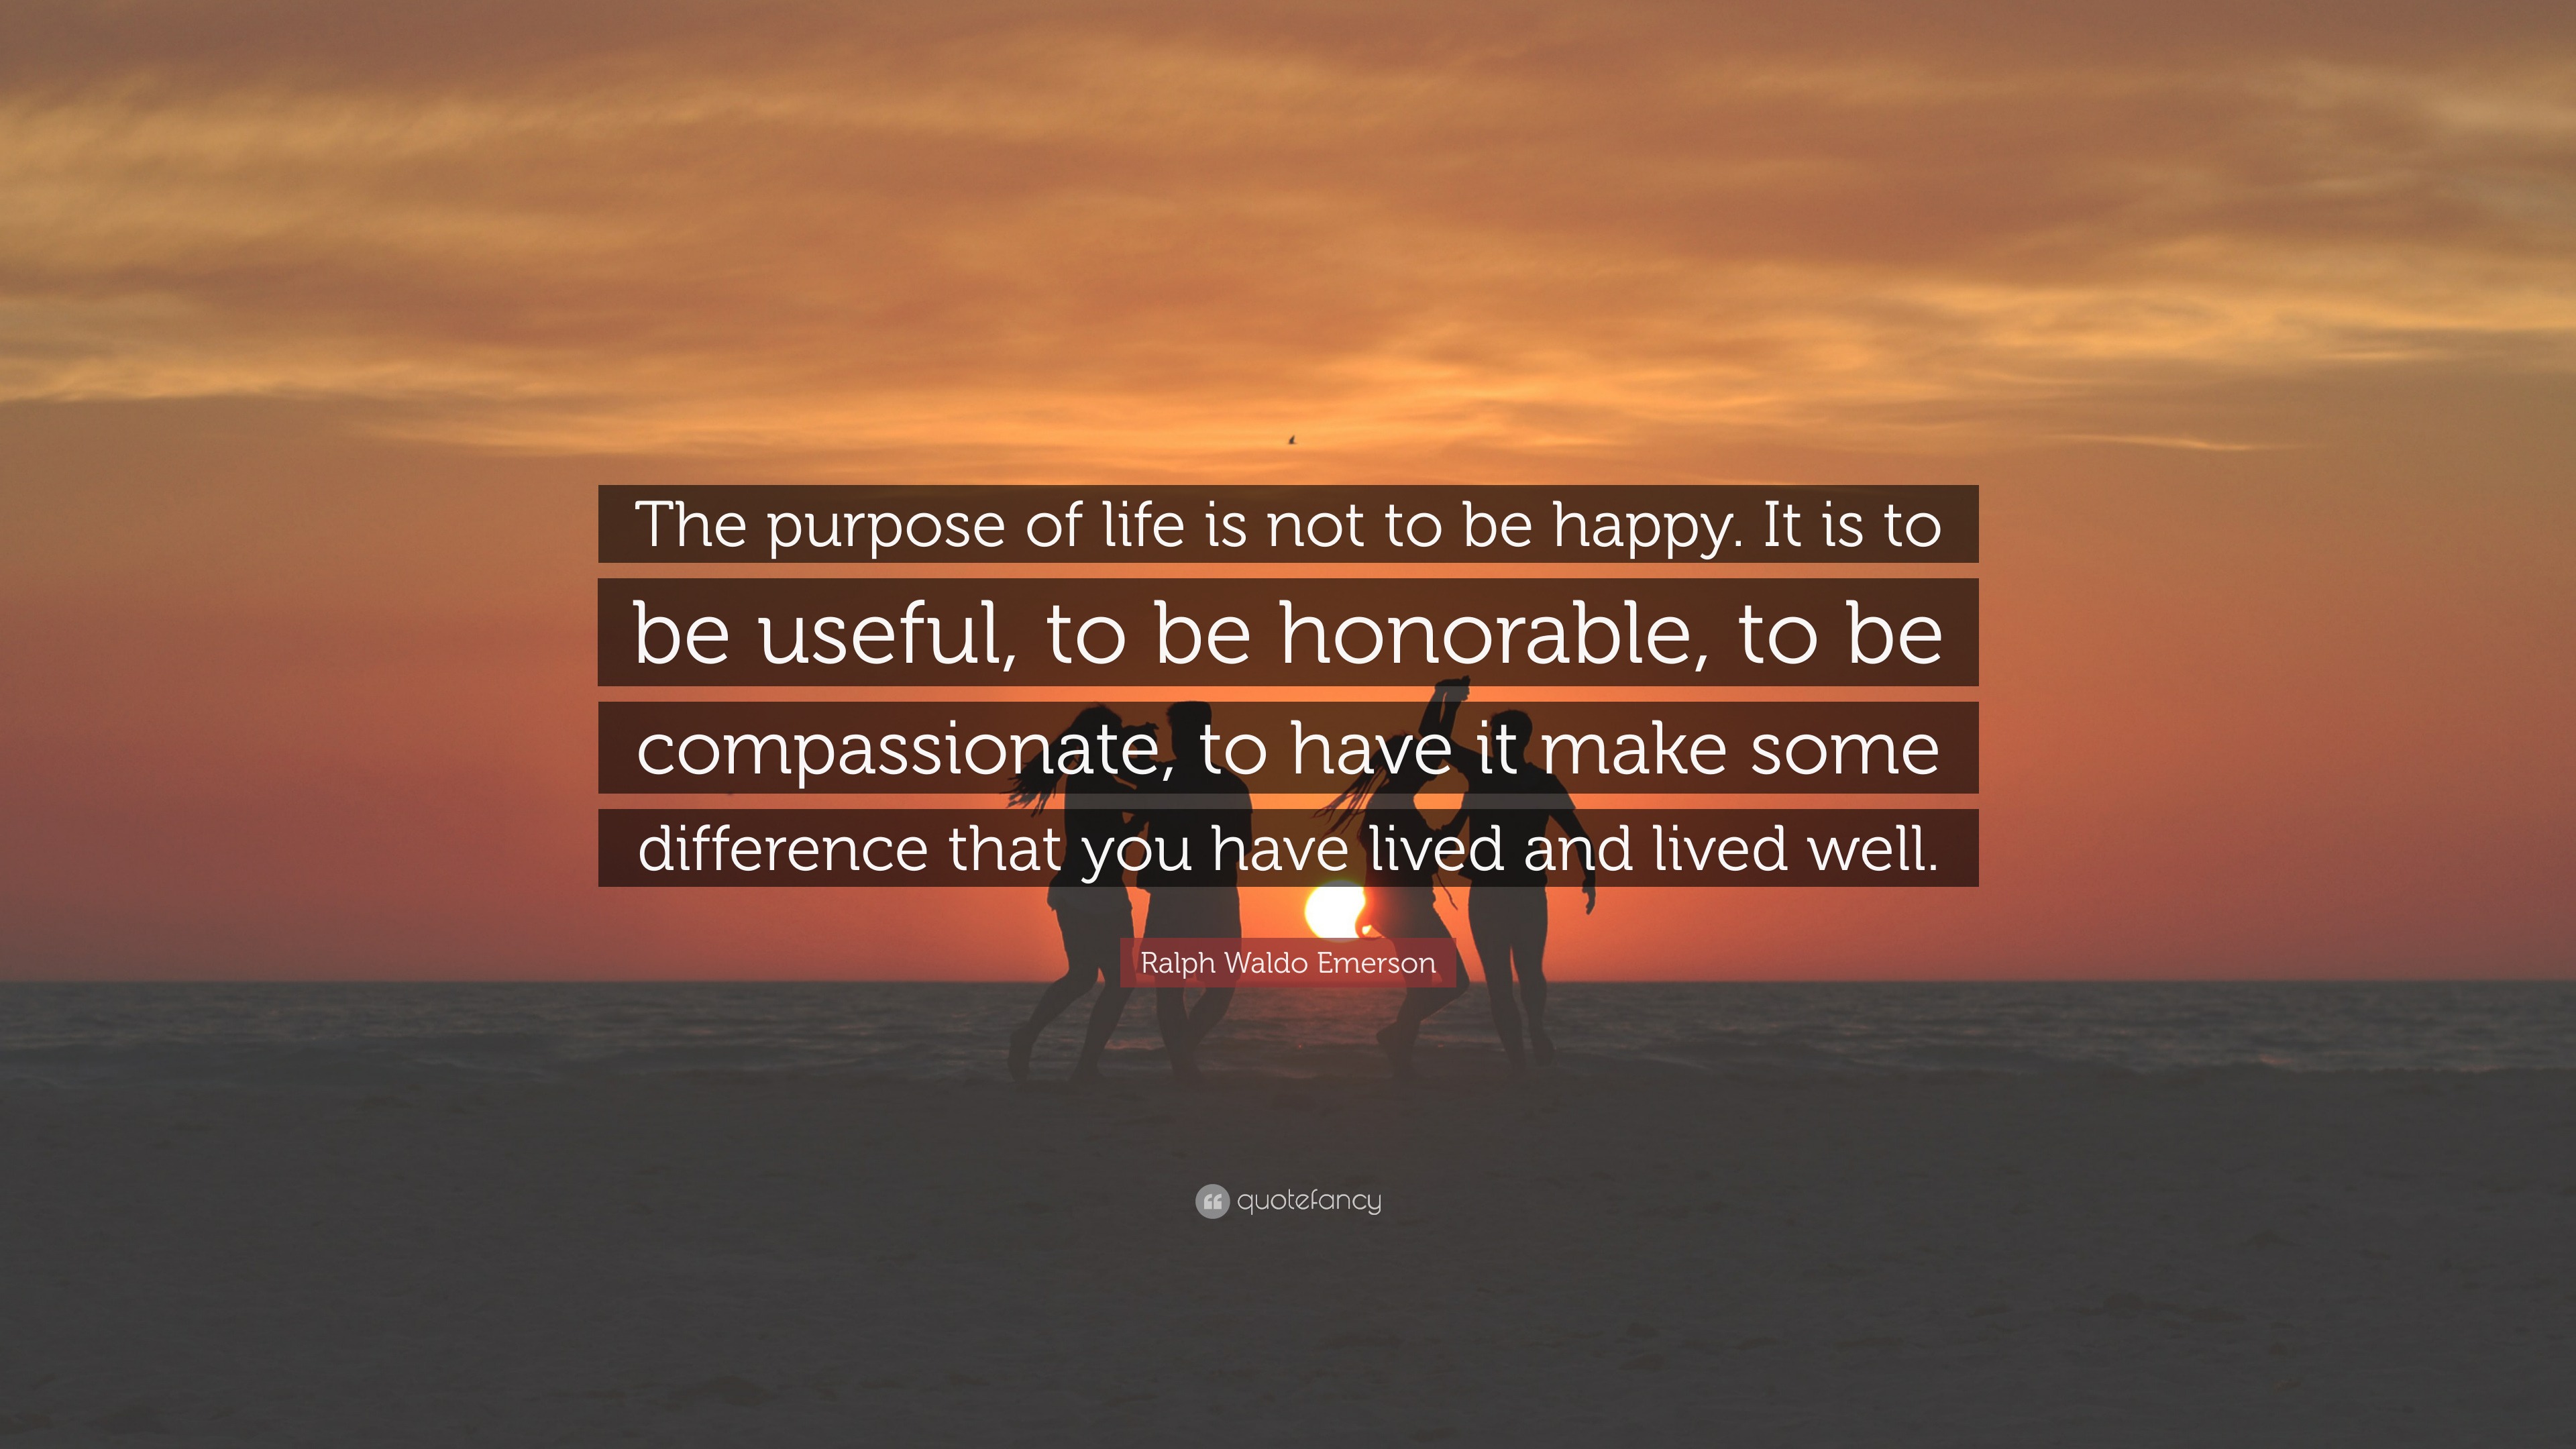 ralph waldo emerson quotes life ralph waldo emerson quote u201cthe purpose of life is not to